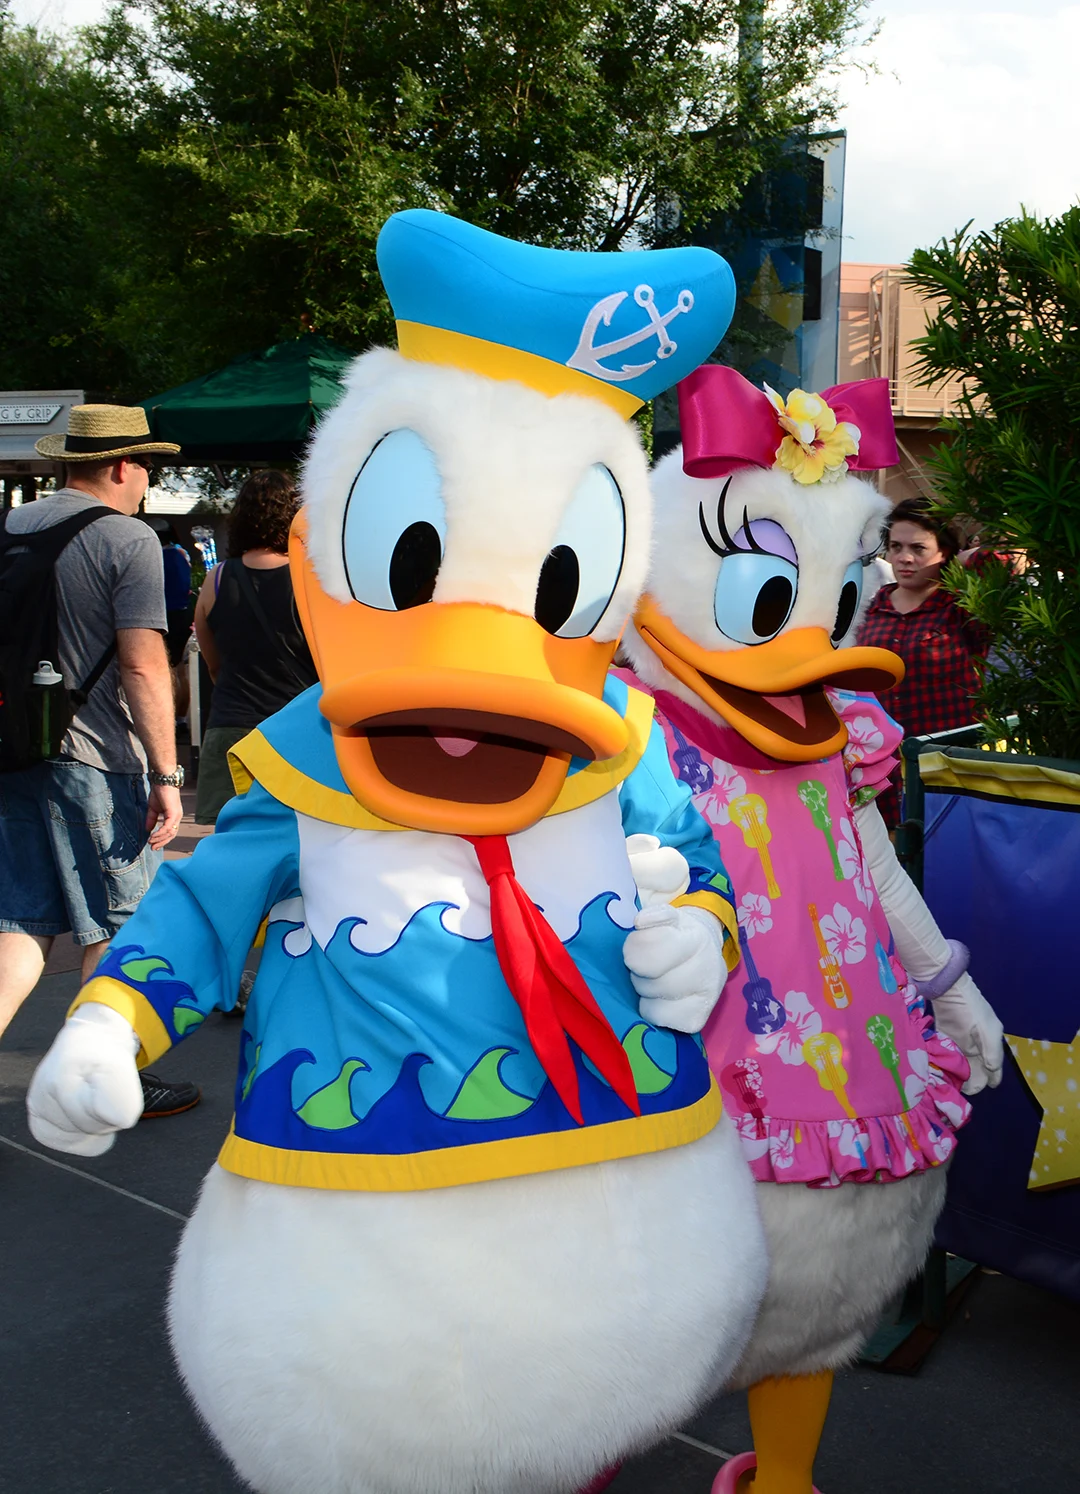 Donald Duck Rock your summer side dance party at Hollywood Studios June 2014